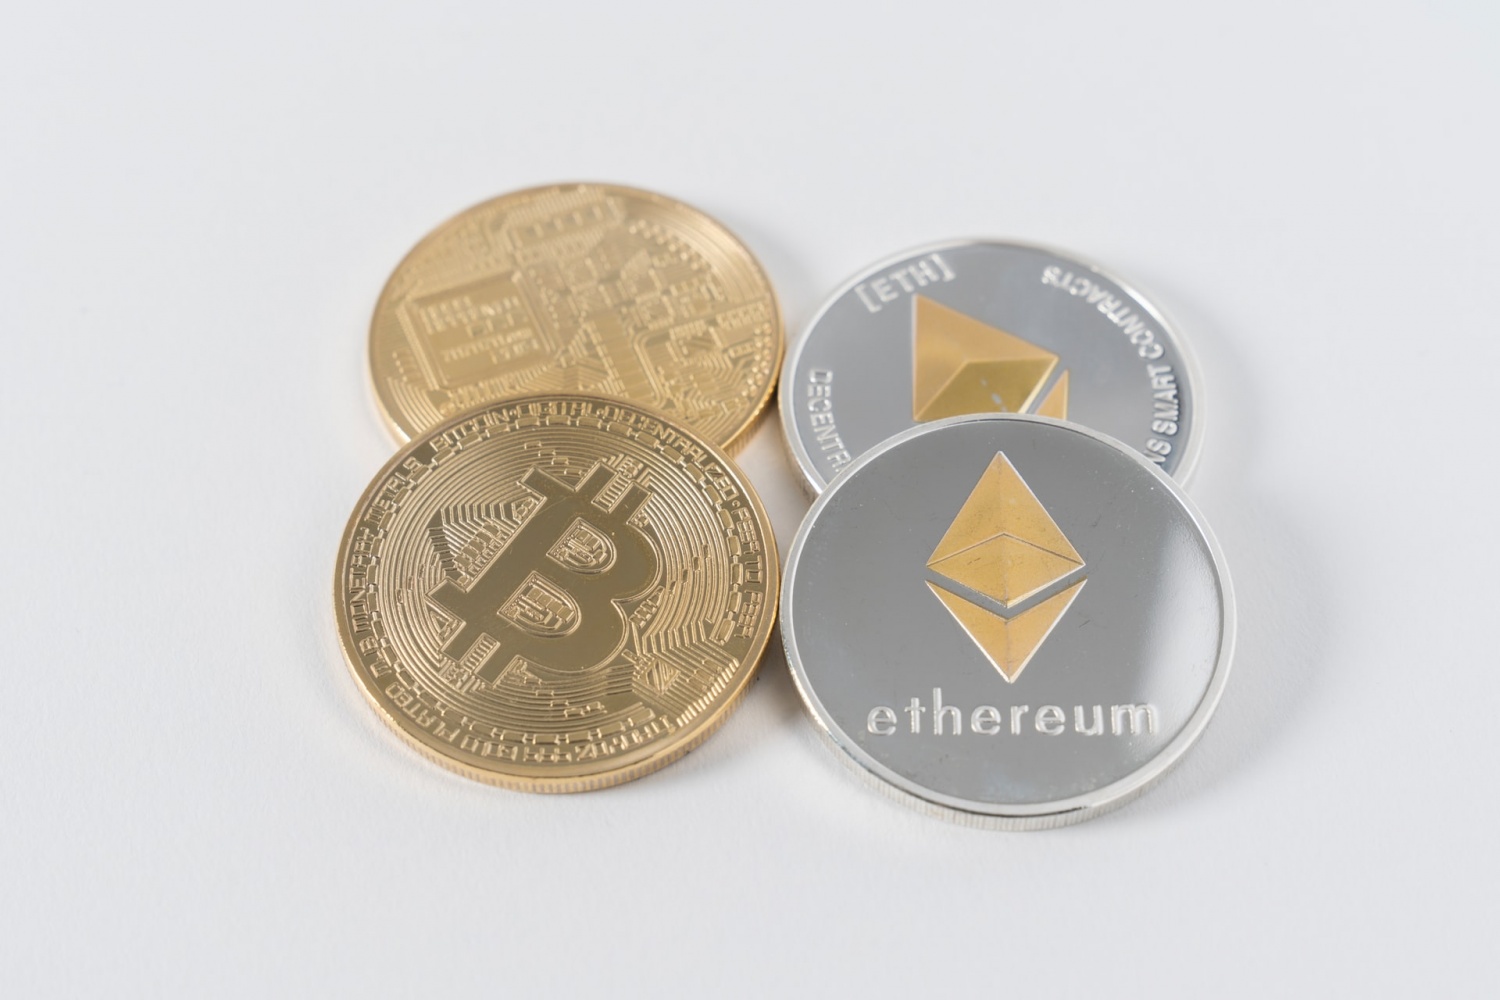 Ethereum Price Prediction: ETH Value Gets Positive Boost With Win vs. Bitcoin